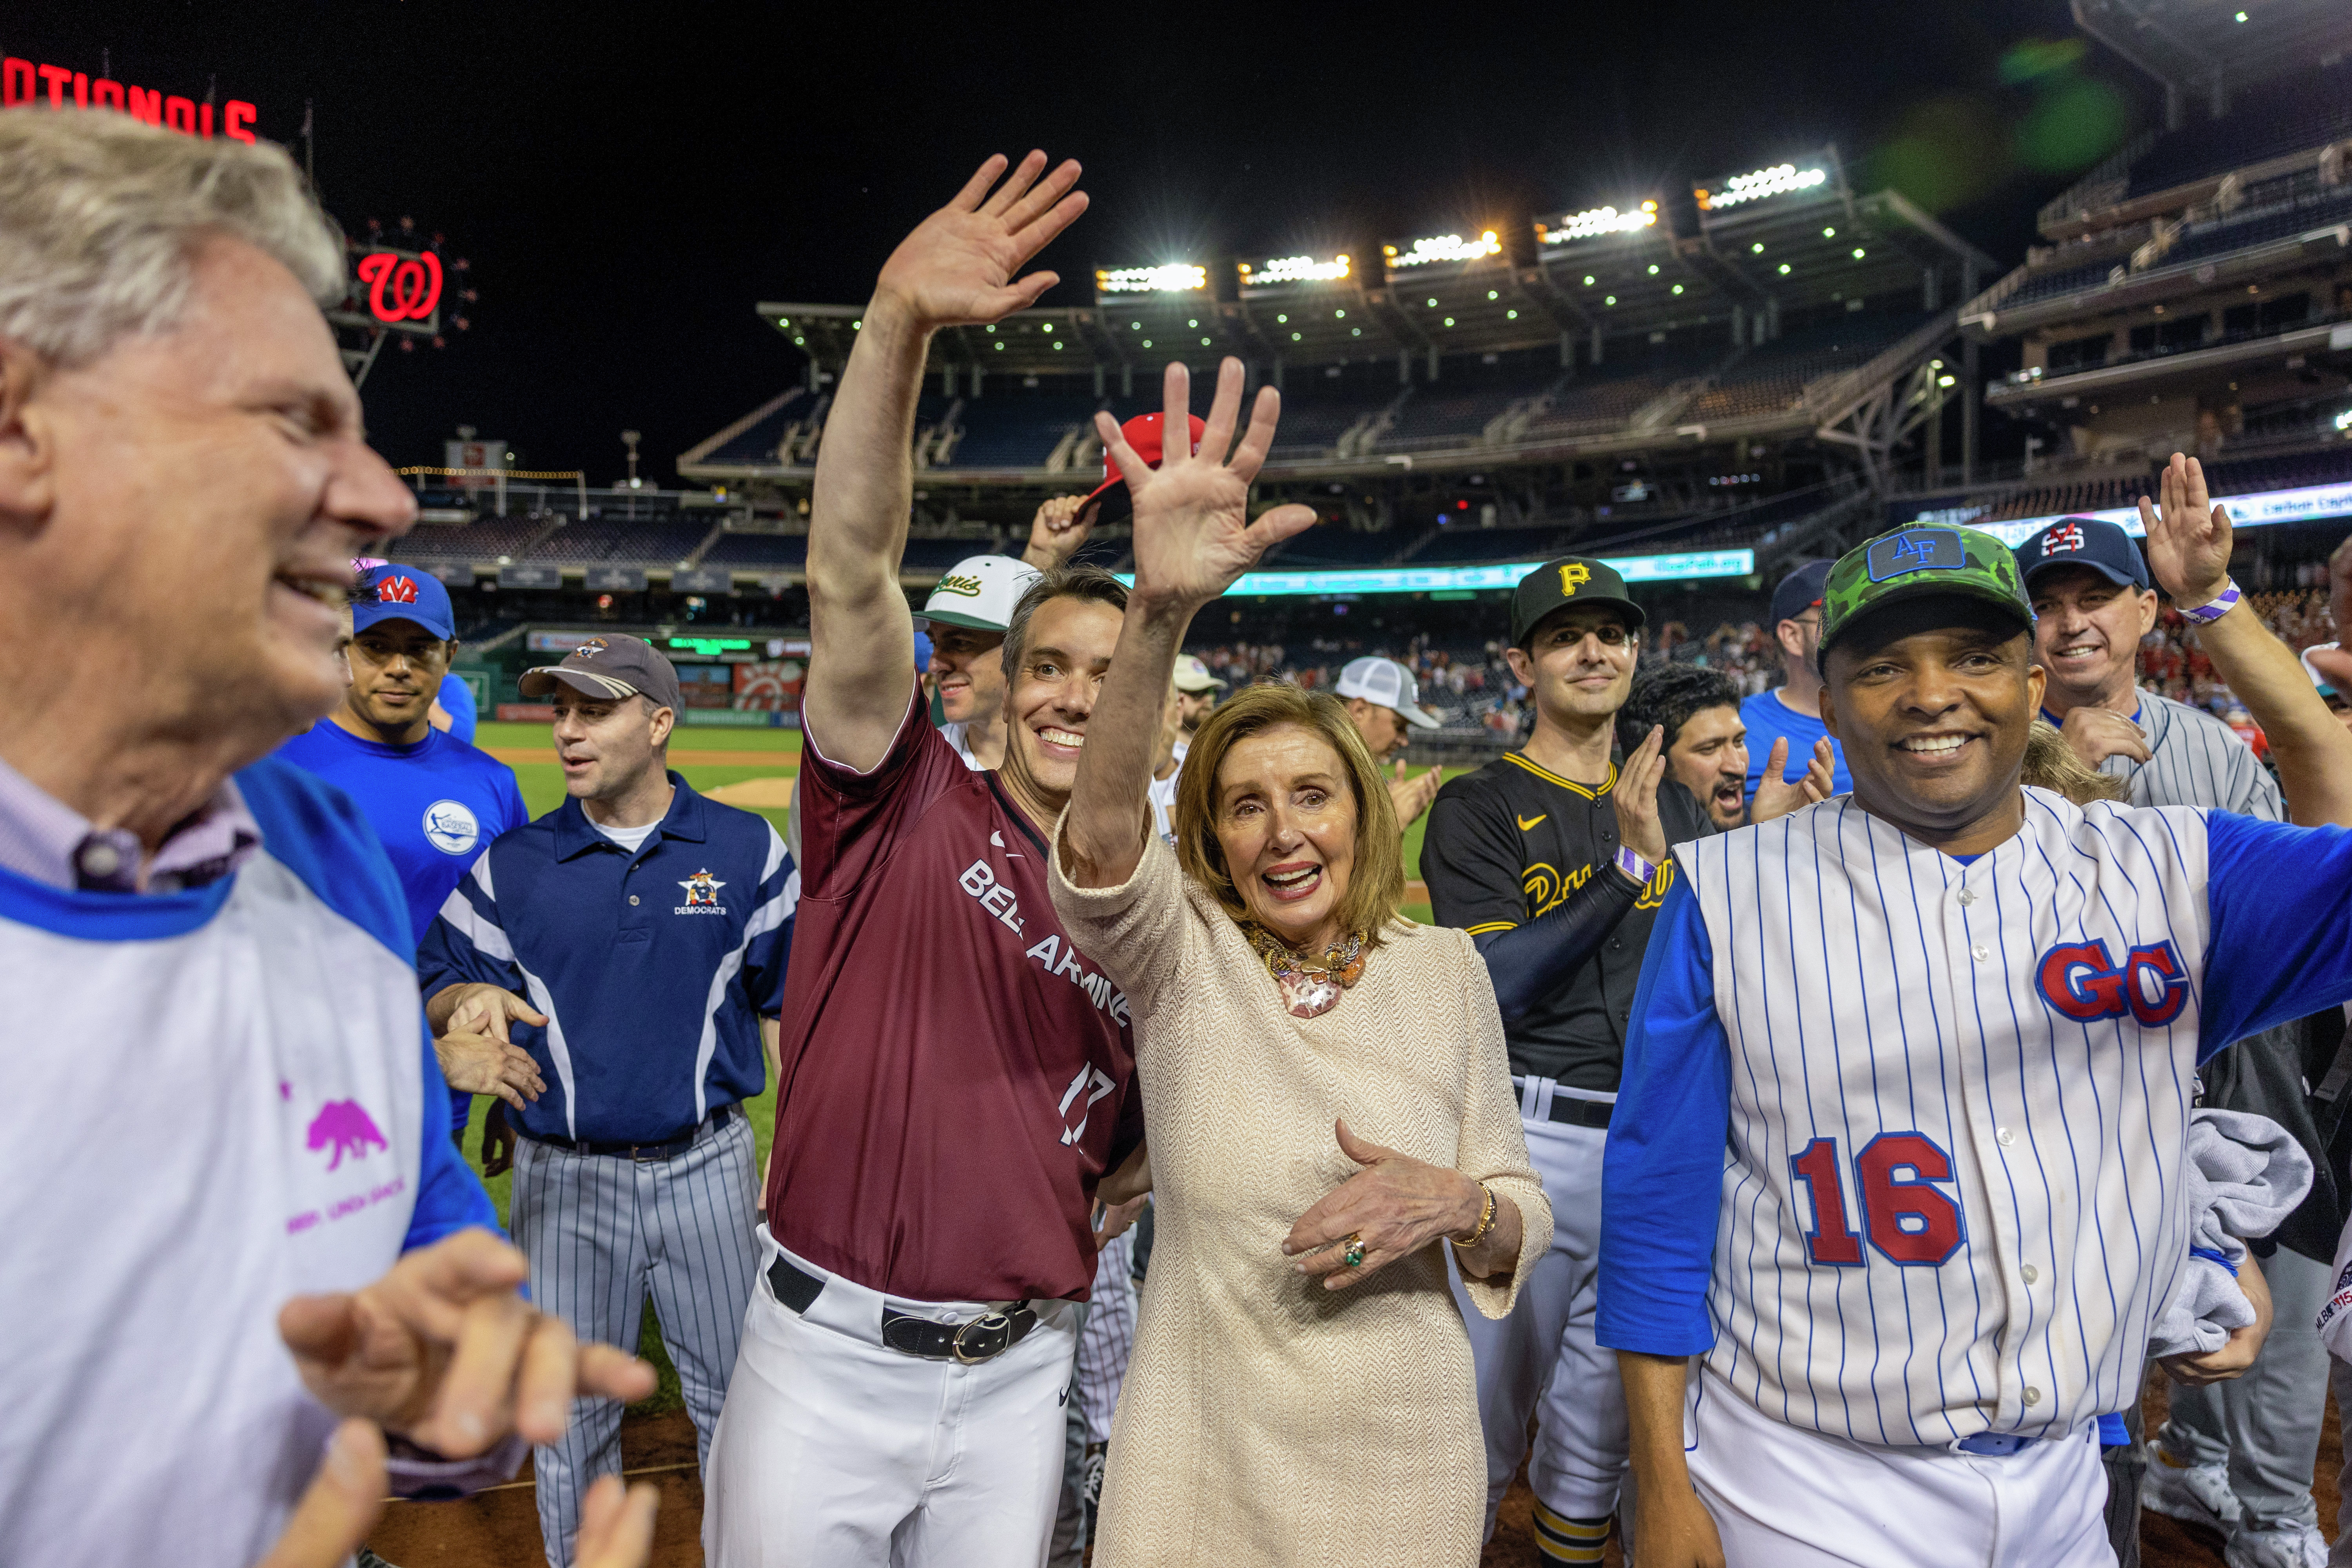 The Congressional Baseball Game is Back!